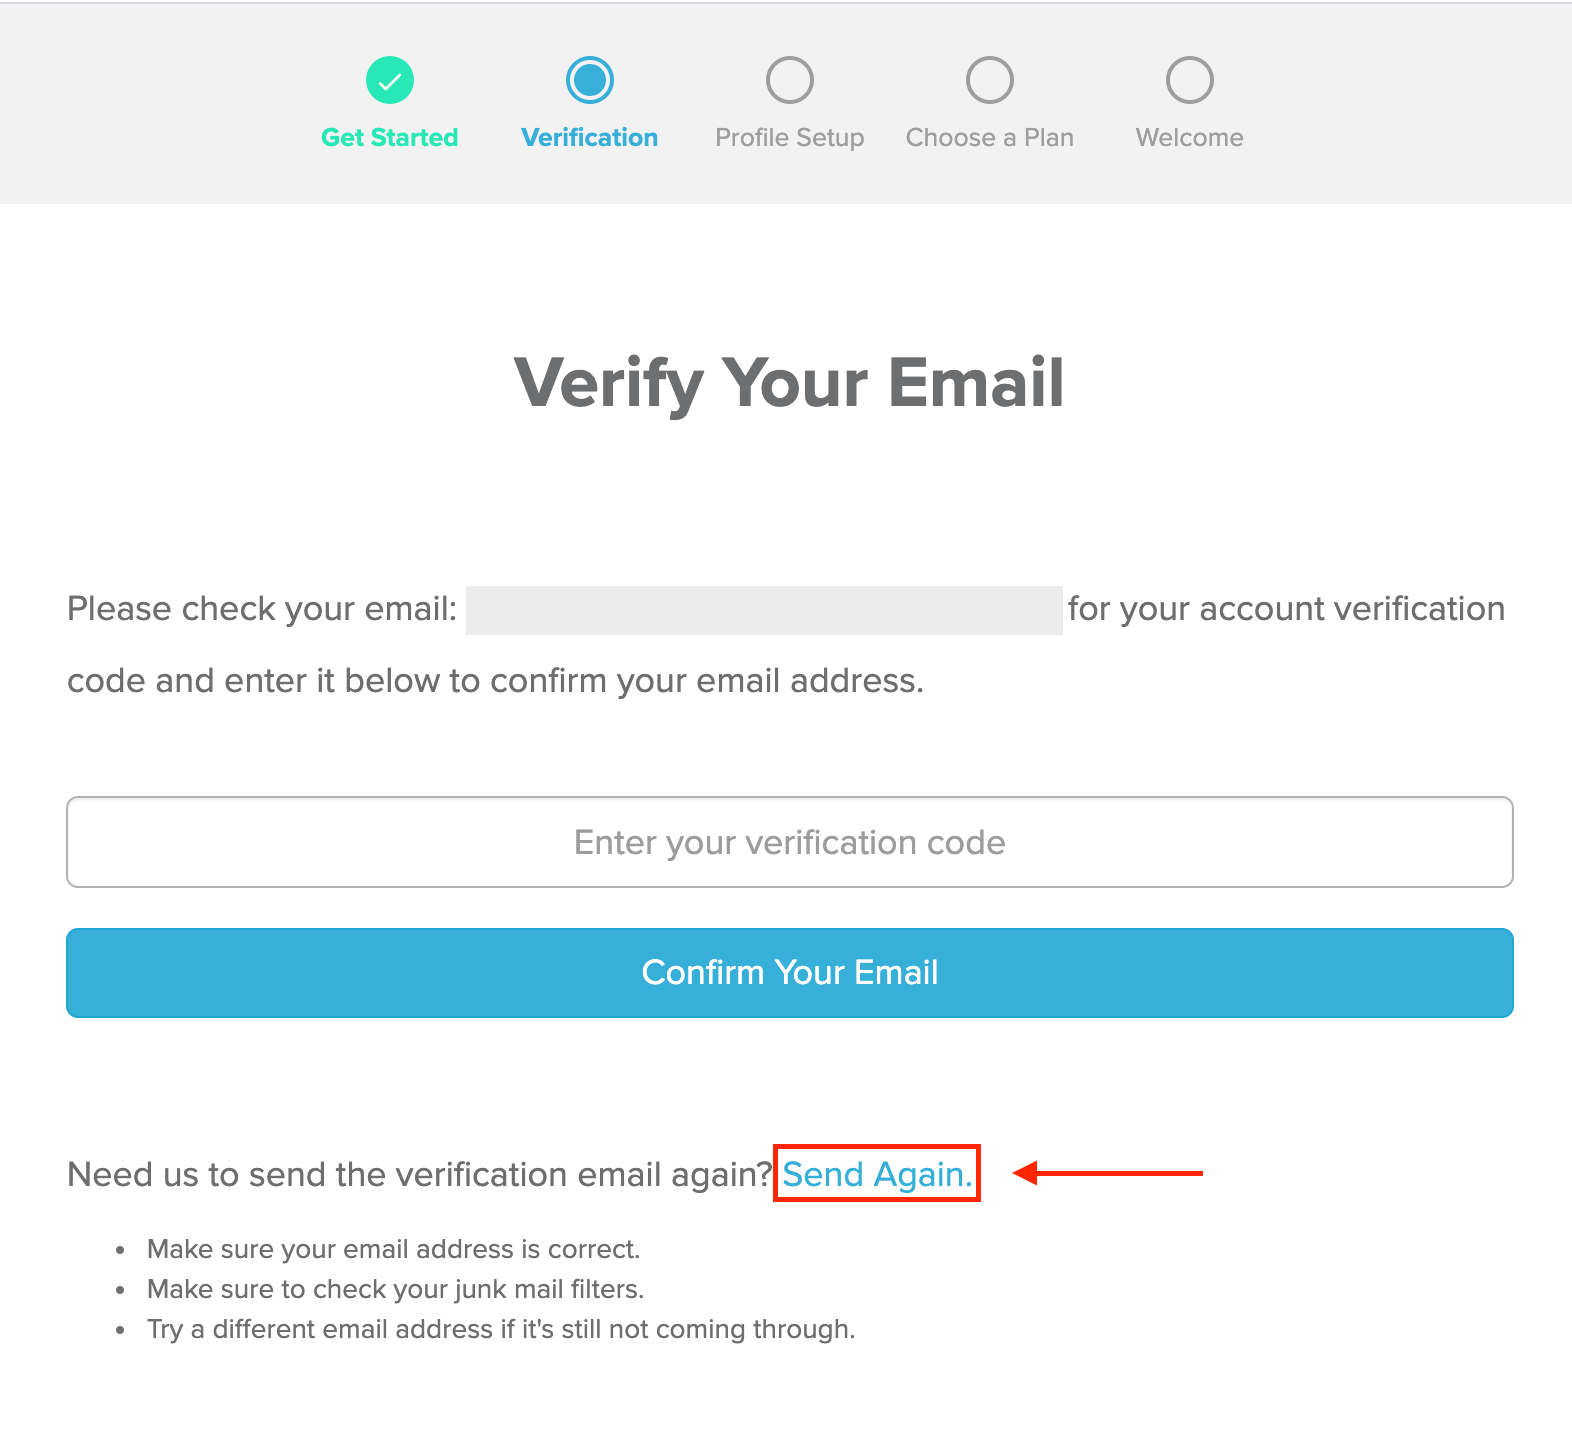 Verify your email page